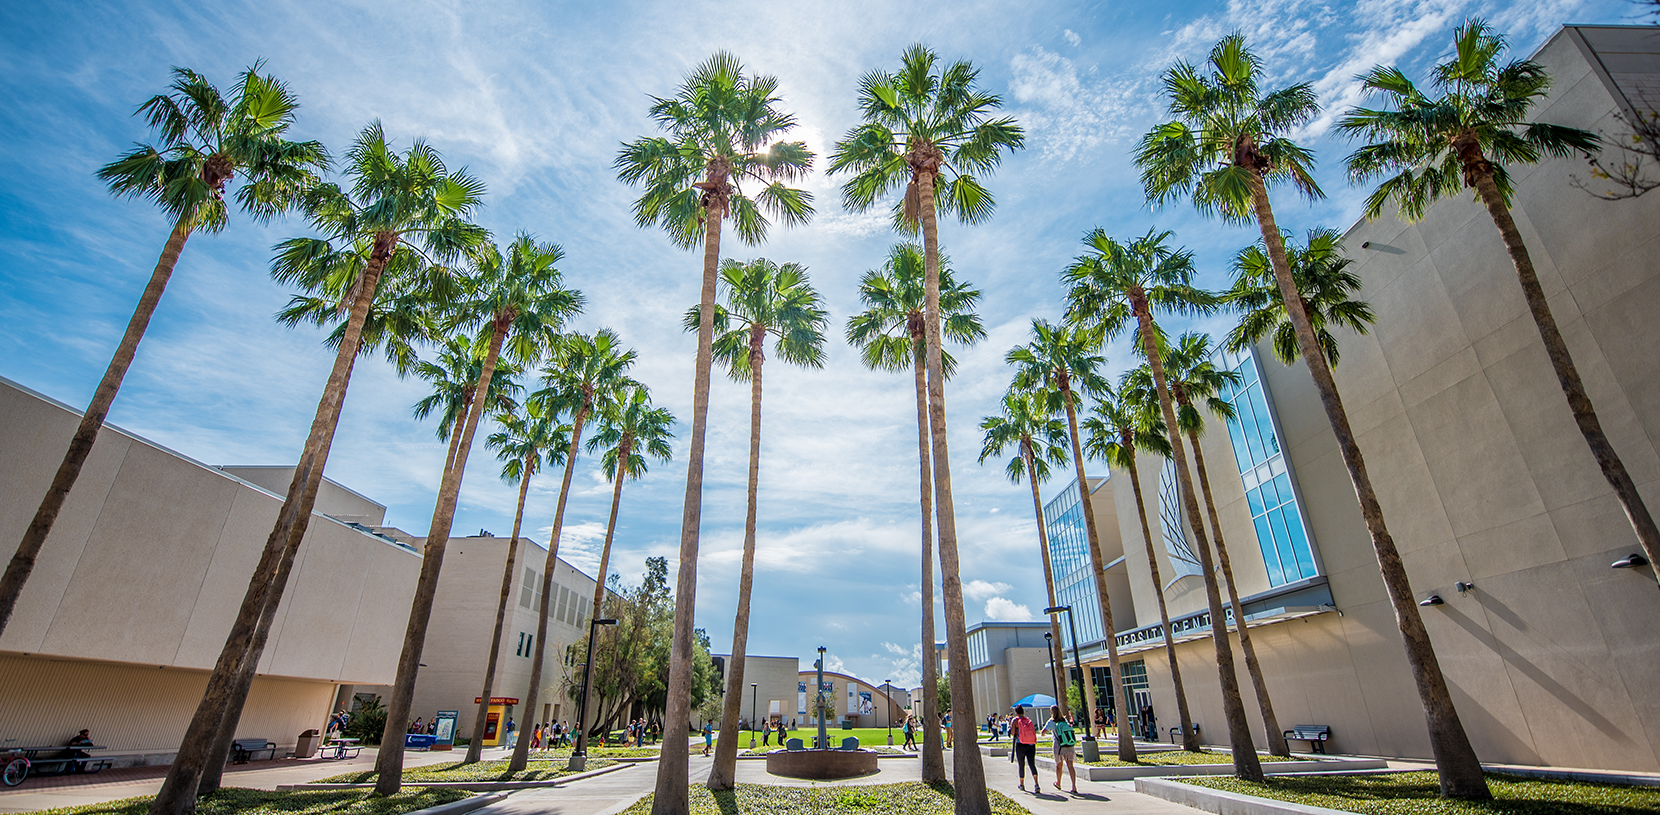 Campus, view of the tall palm trees